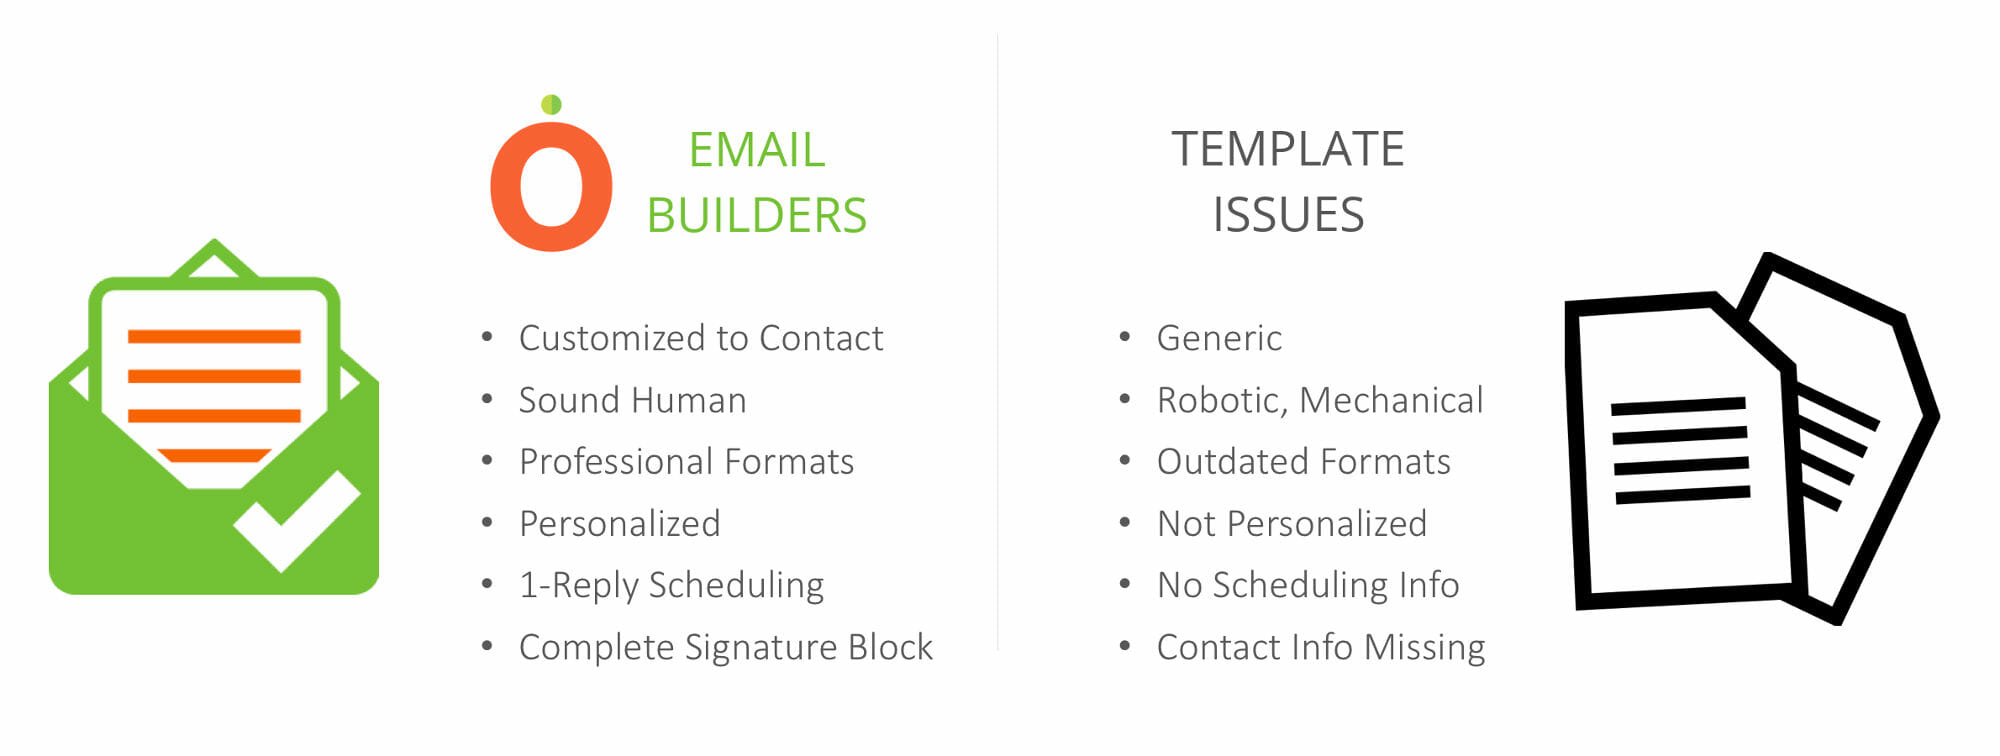 Chart showing why Email Builders are better than generic email templates for networking.